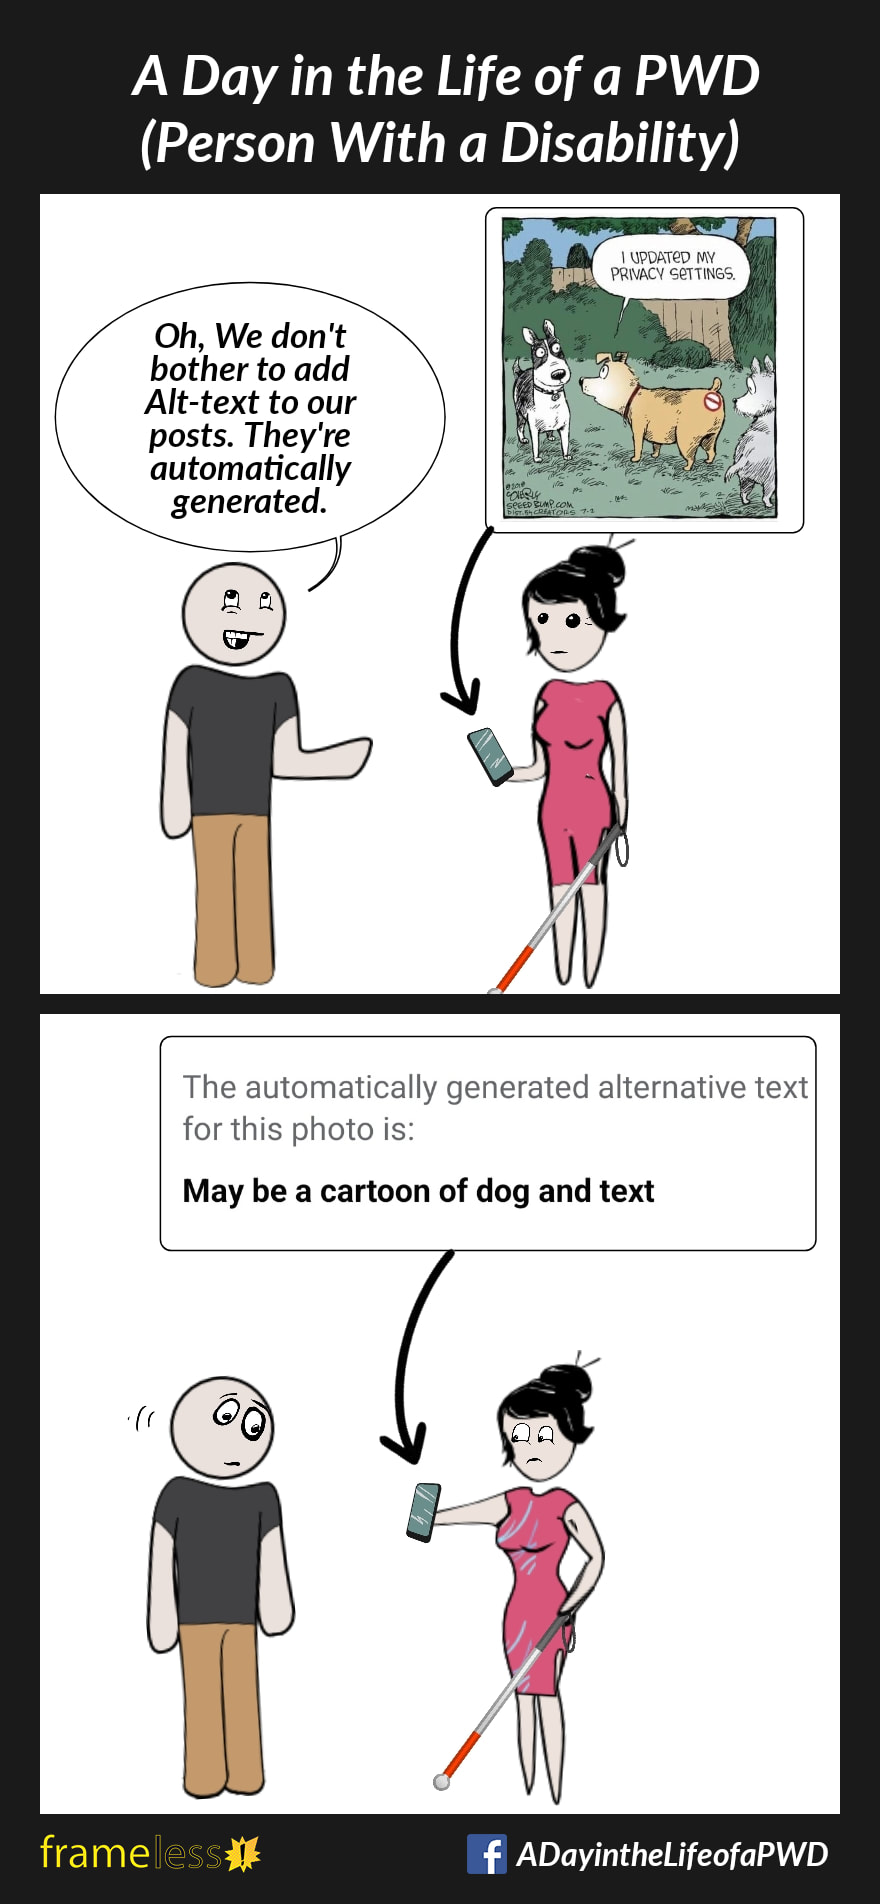 COMIC STRIP 
A Day in the Life of a PWD (Person With a Disability) 

Frame 1:
A blind woman who uses a white cane is talking to a man. She is holding her phone, which displays a cartoon drawing of a dog talking to his dog friends. There is a 'no entry' symbol on his bottom. The dog says 